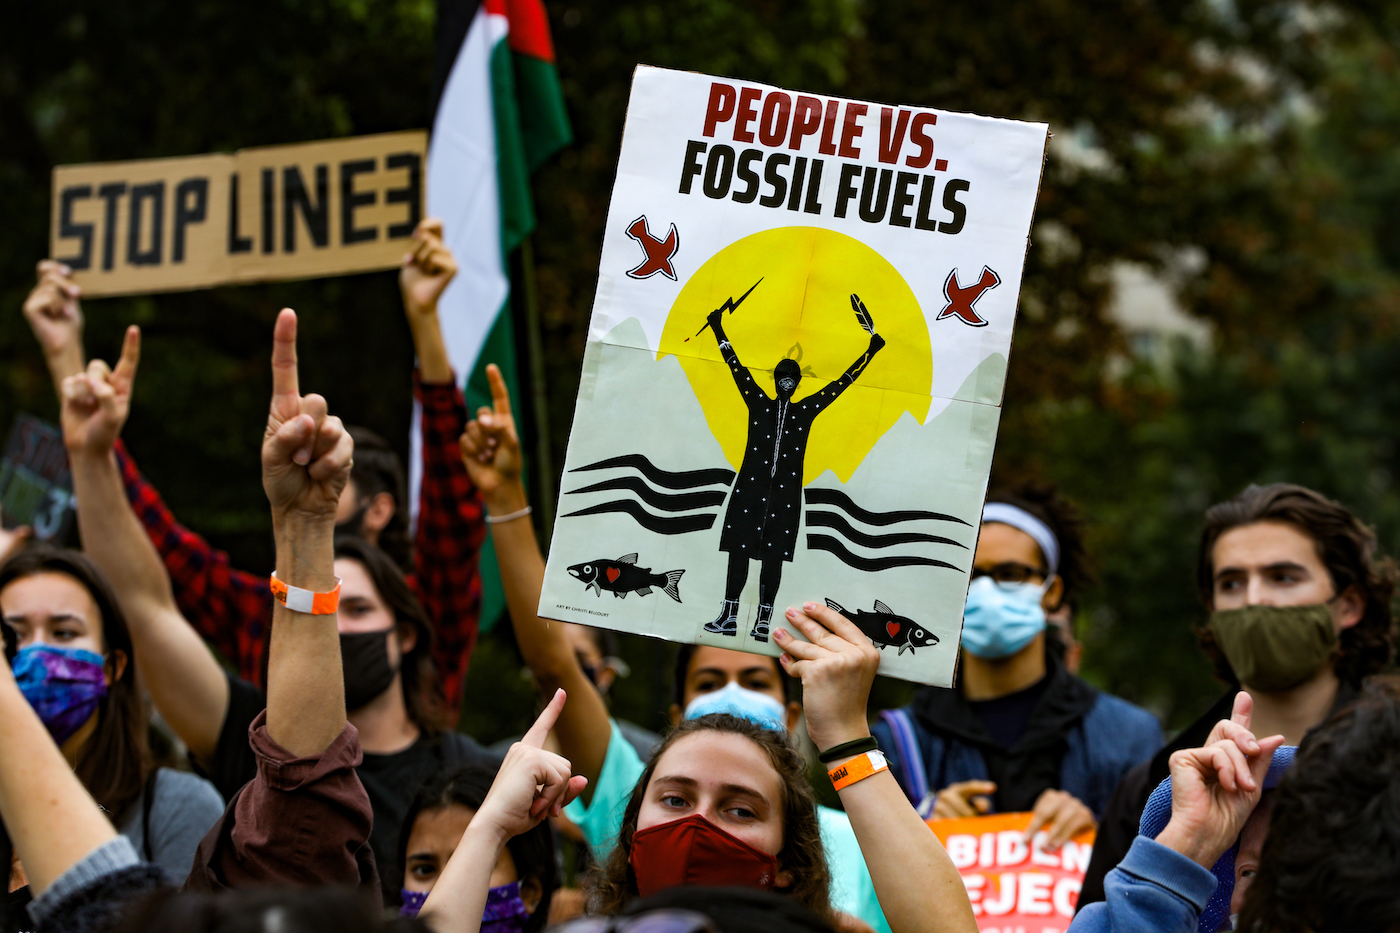 Protesters hold signs that say "Stop Line 3" and "People Vs. Fossil Fuels."